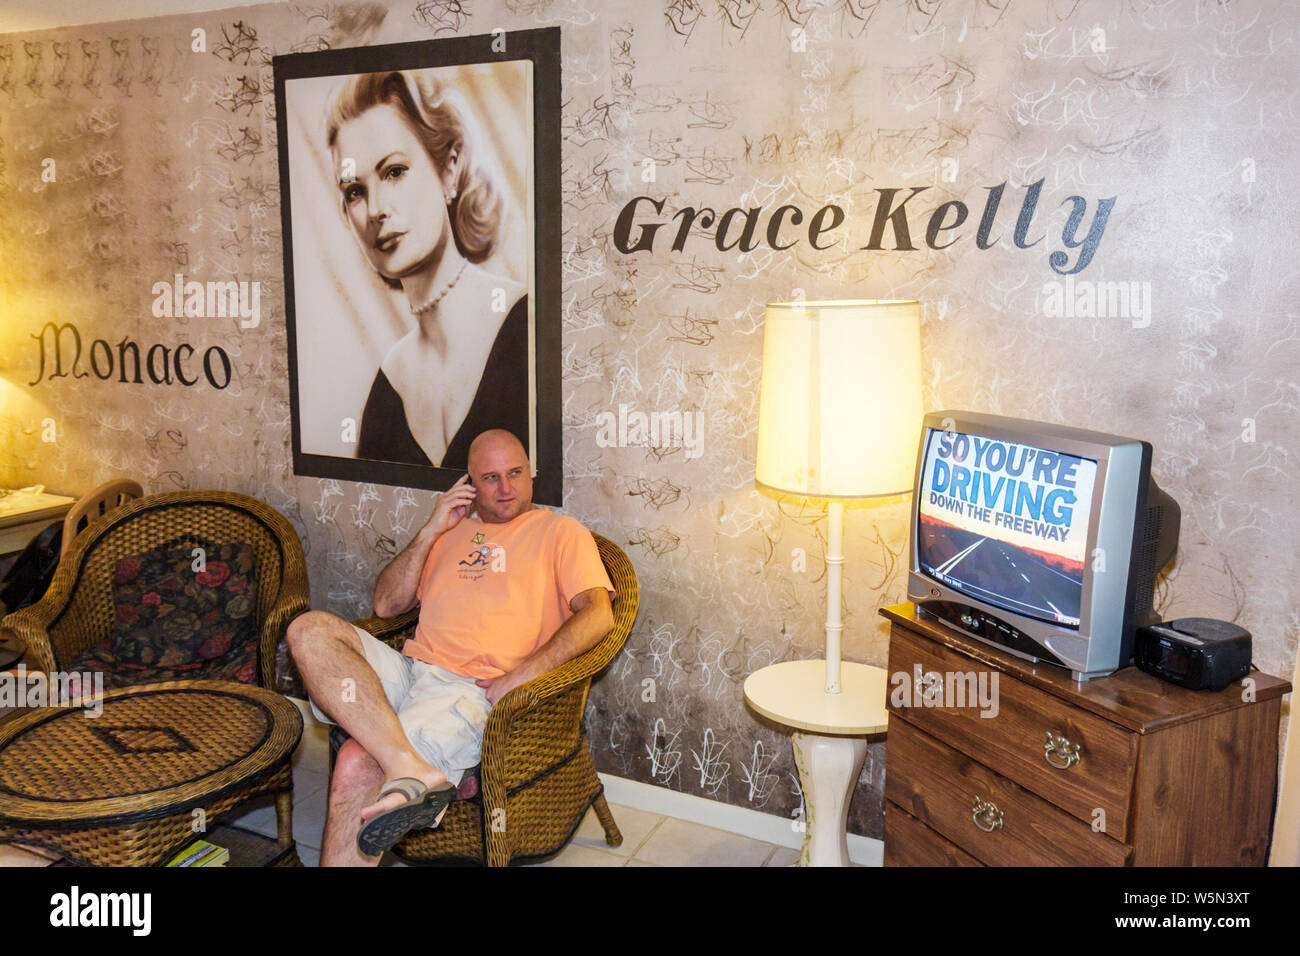 Florida Lake Worth,The Motel of Stars,lodging,Americana,themed rooms,budget,guest room,interior inside,Grace Kelly suite,TV,television,set,adult adult Stock Photo